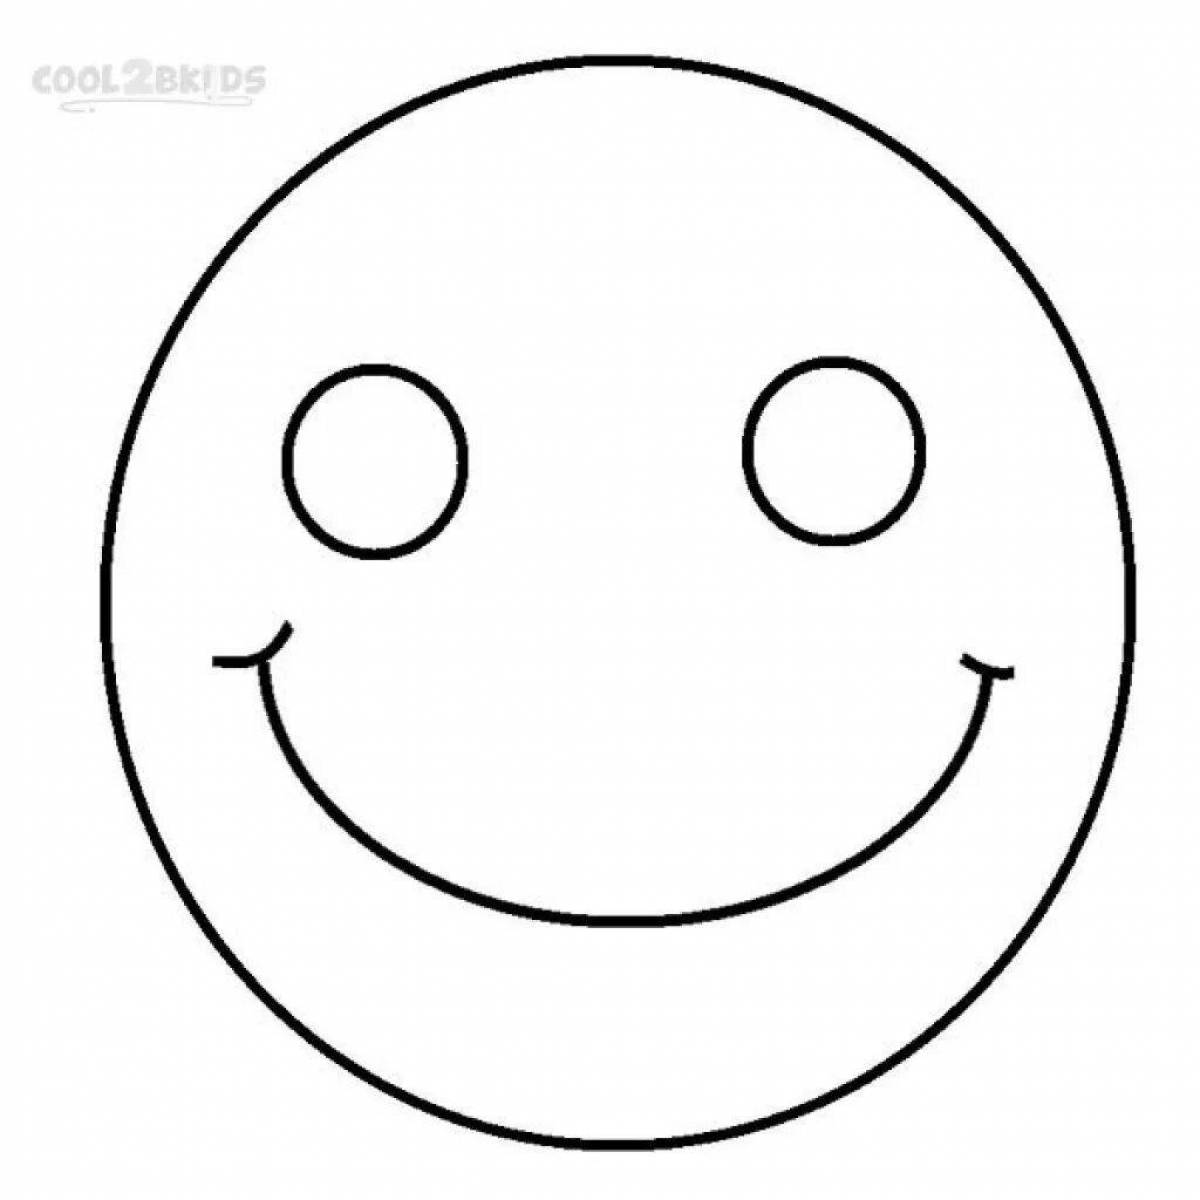 Fun coloring funny smiley face for kids